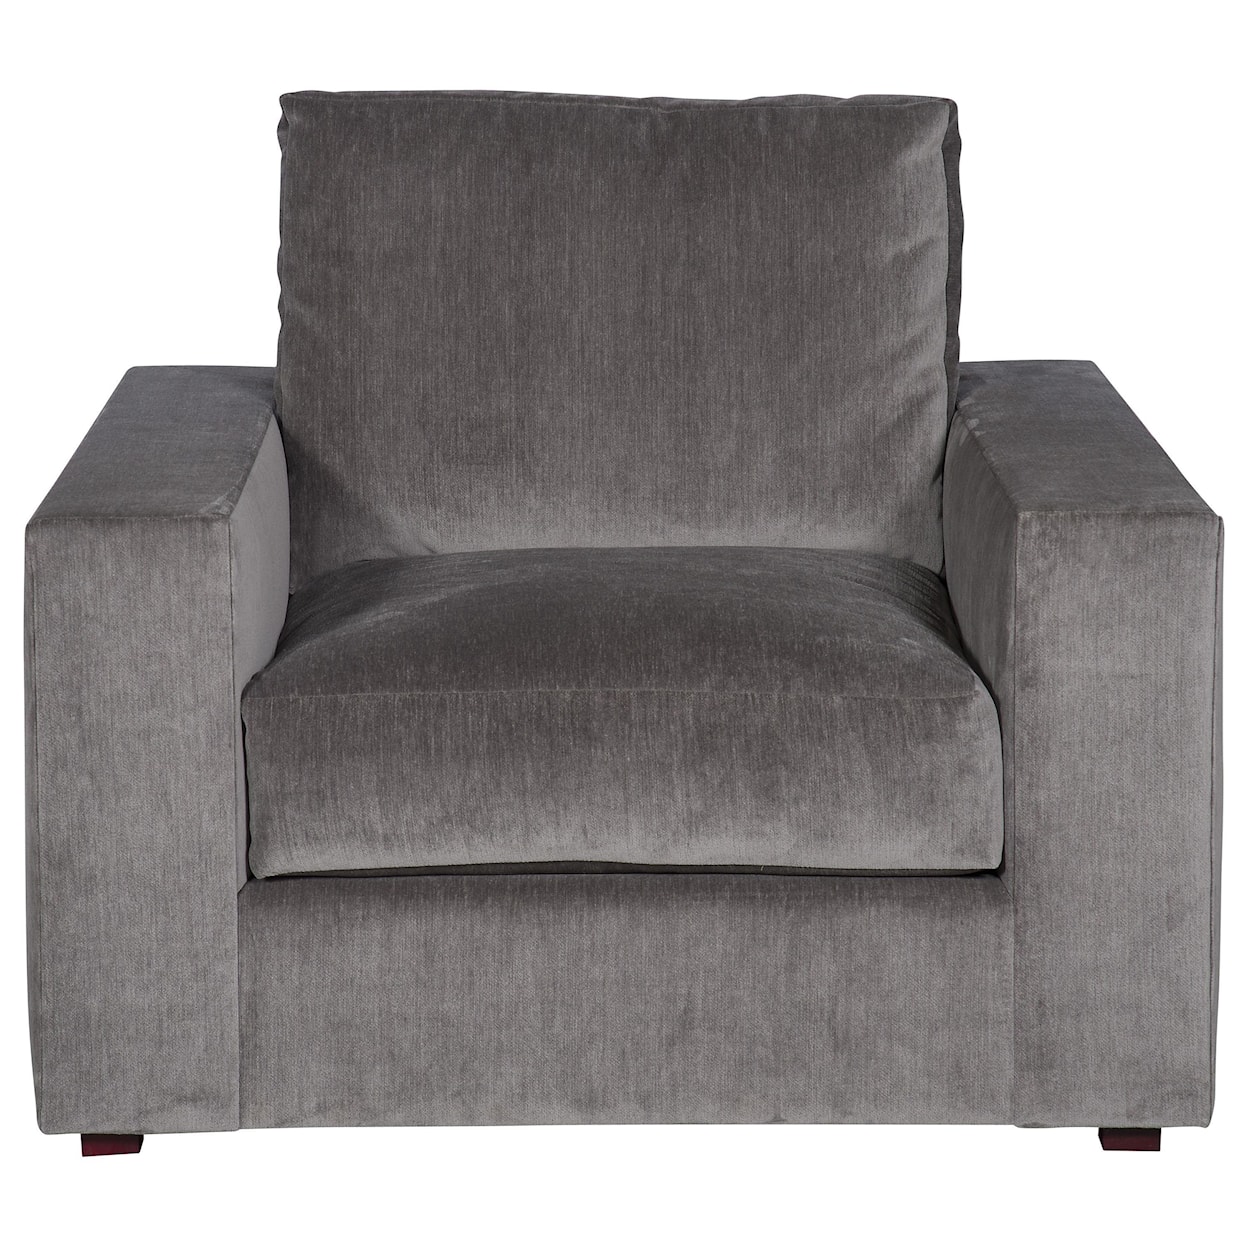 Vanguard Furniture Lucca - Ease Chair